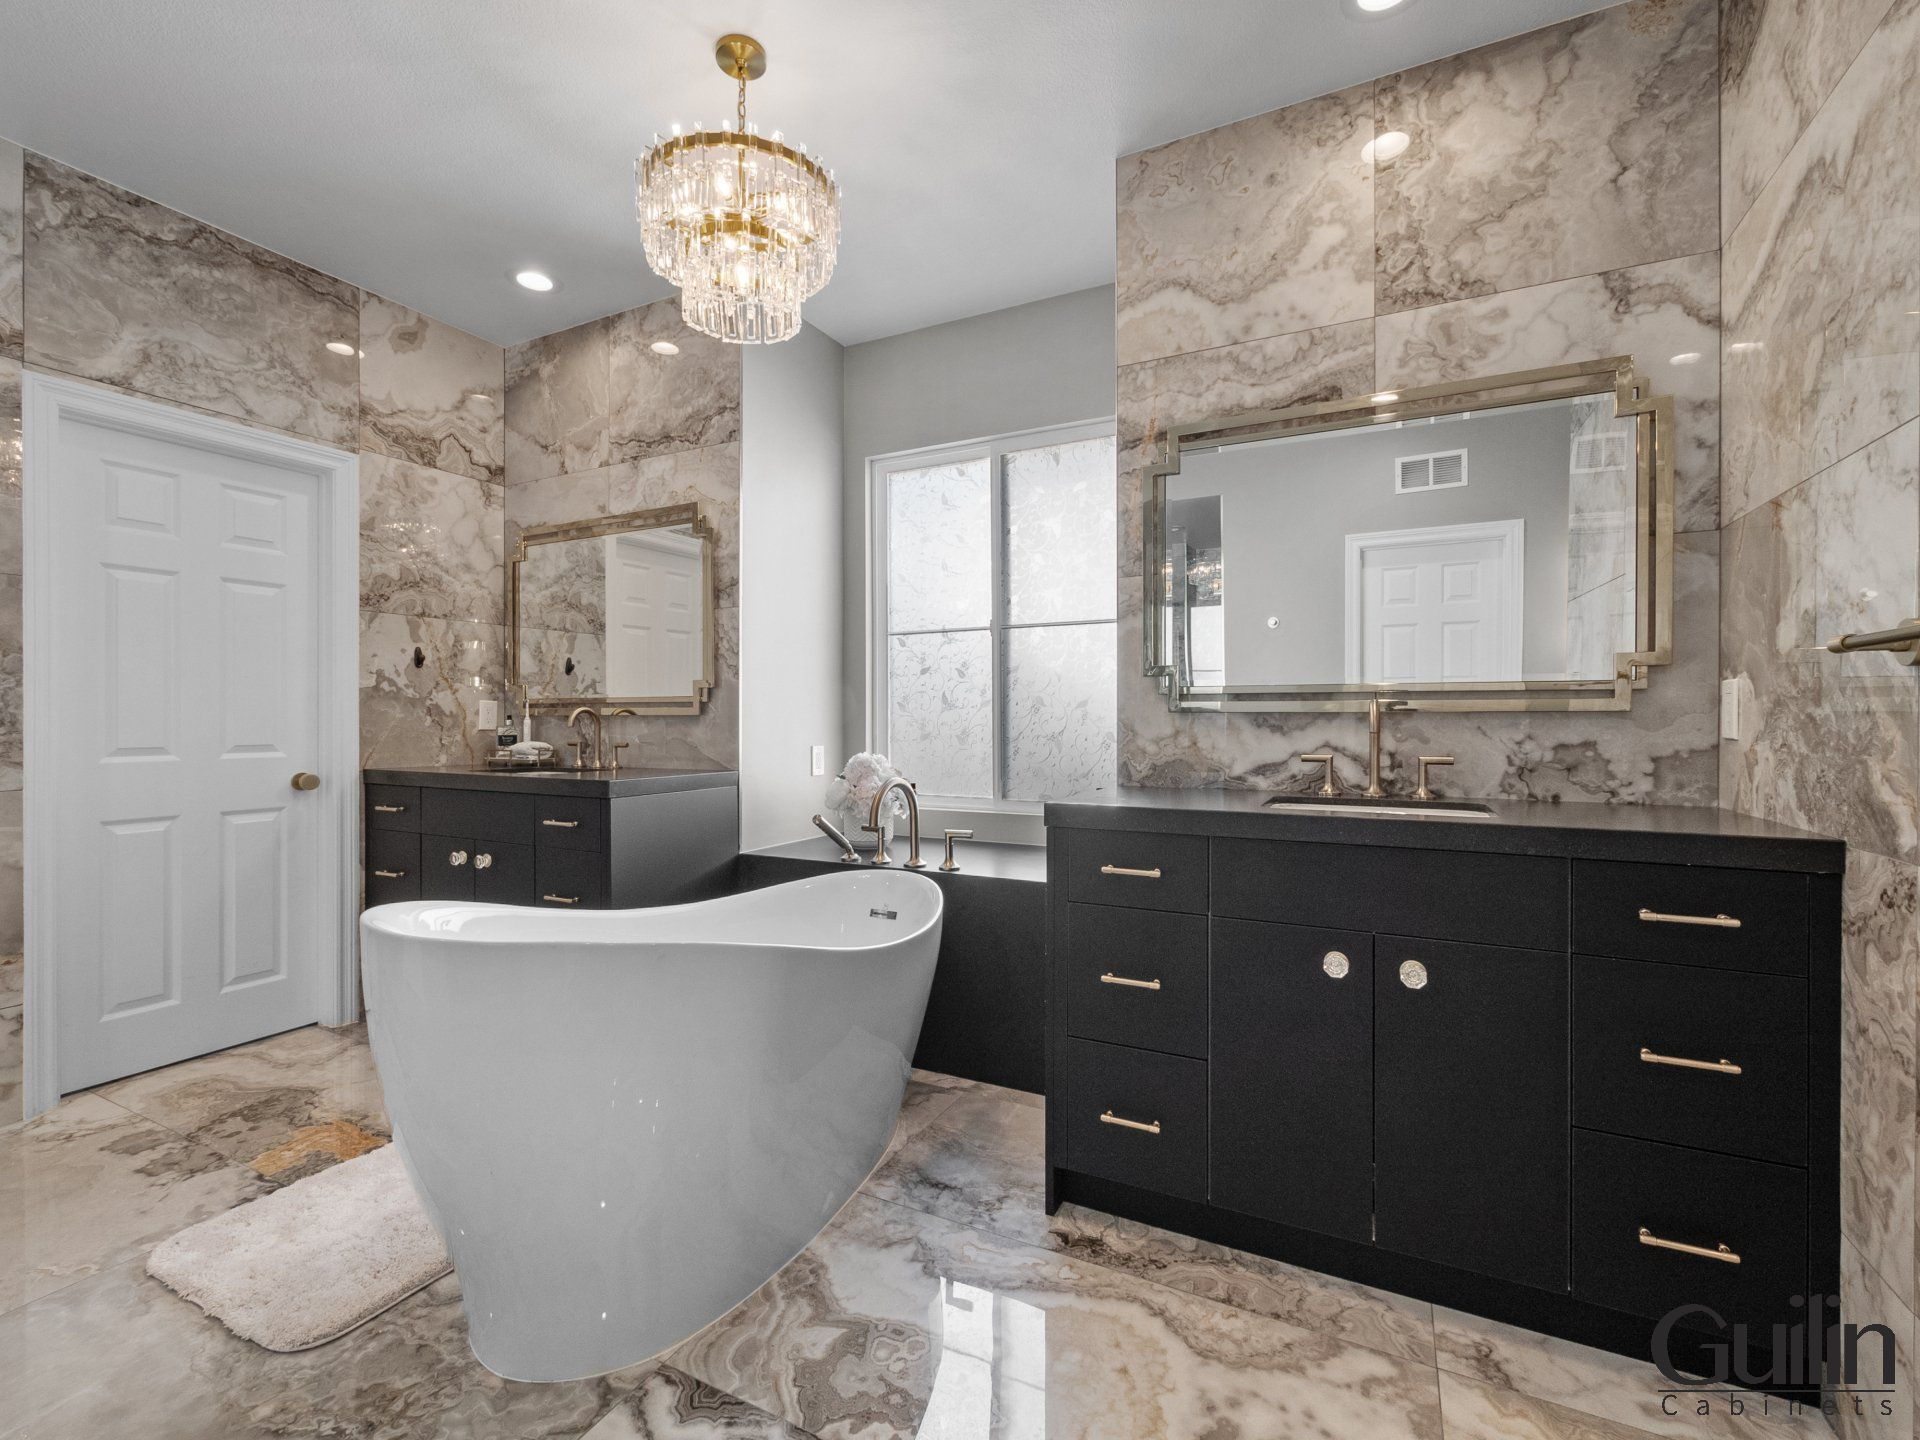 Adding a freestanding bathtub to your space is the master bathroom trend in recent years.